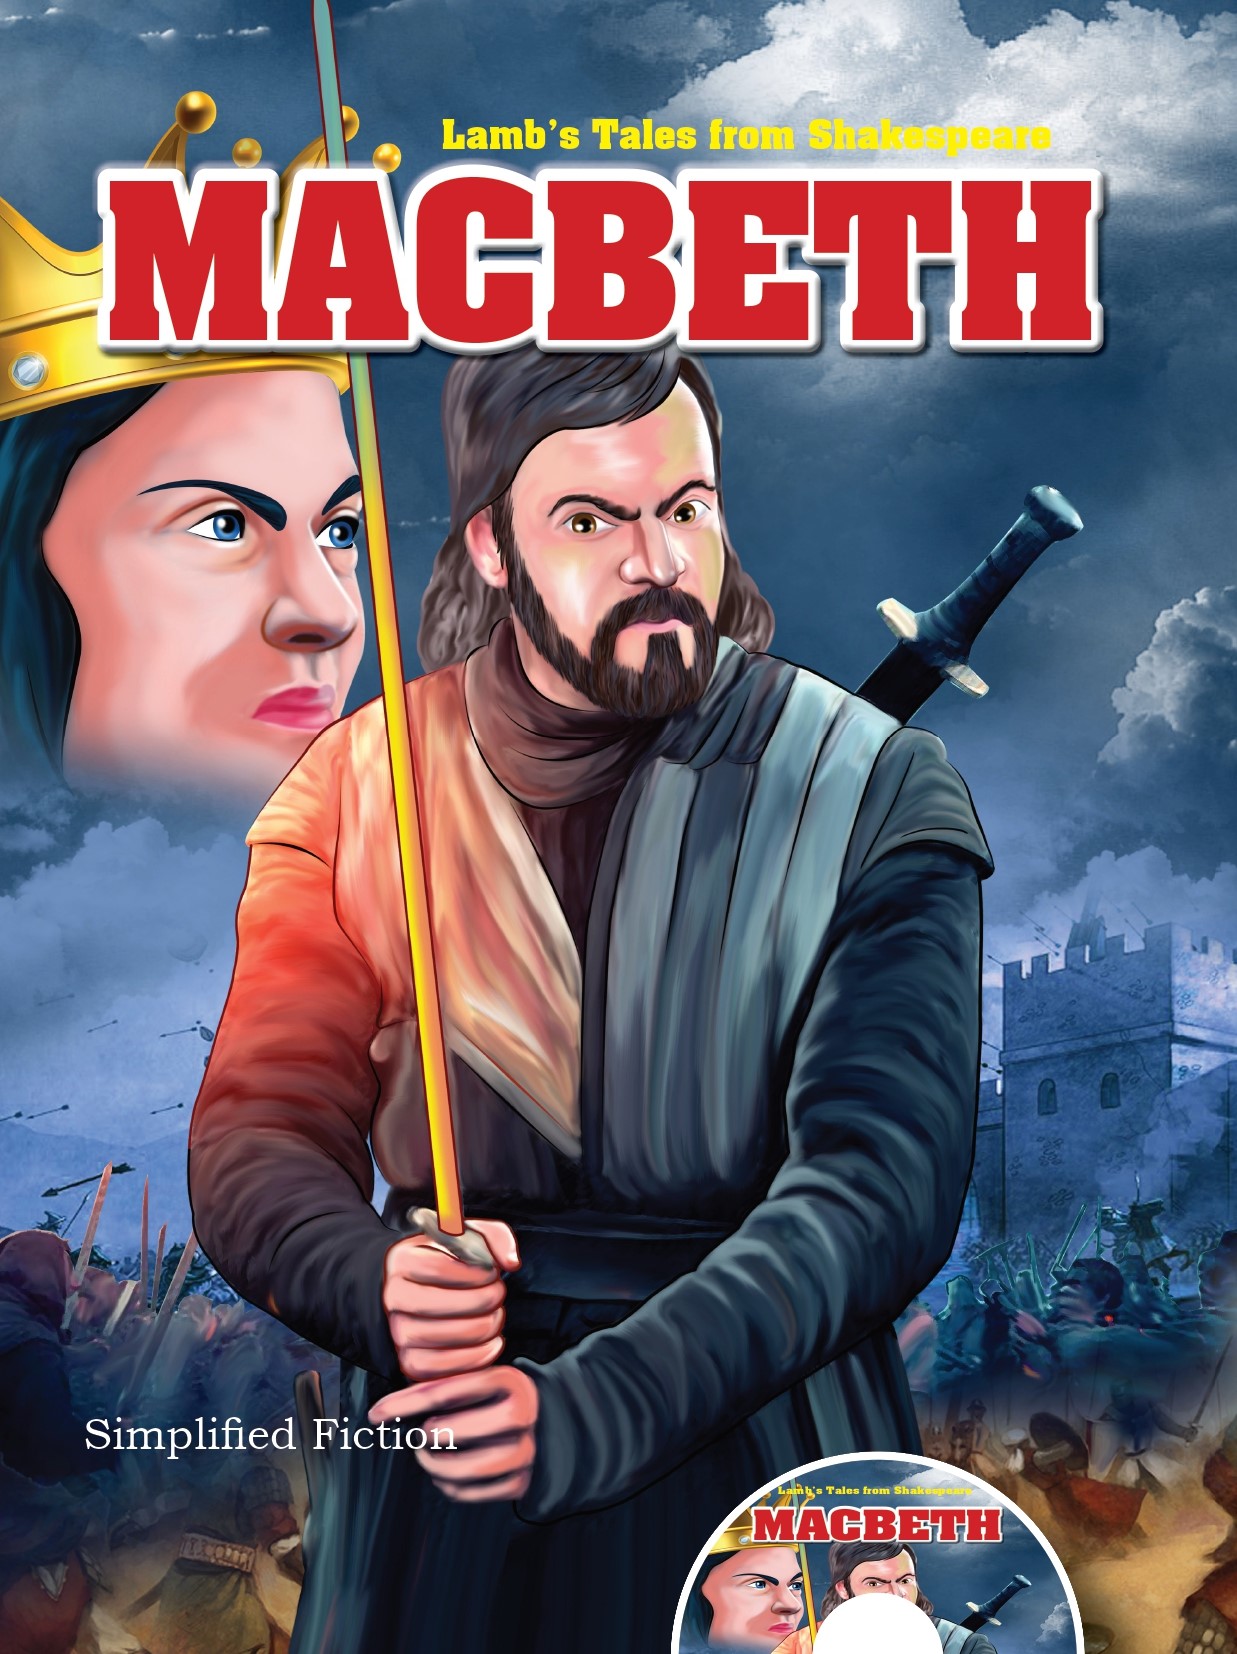 Lamb's Tales from Shakespeare - MACBETH - Simplified Fiction